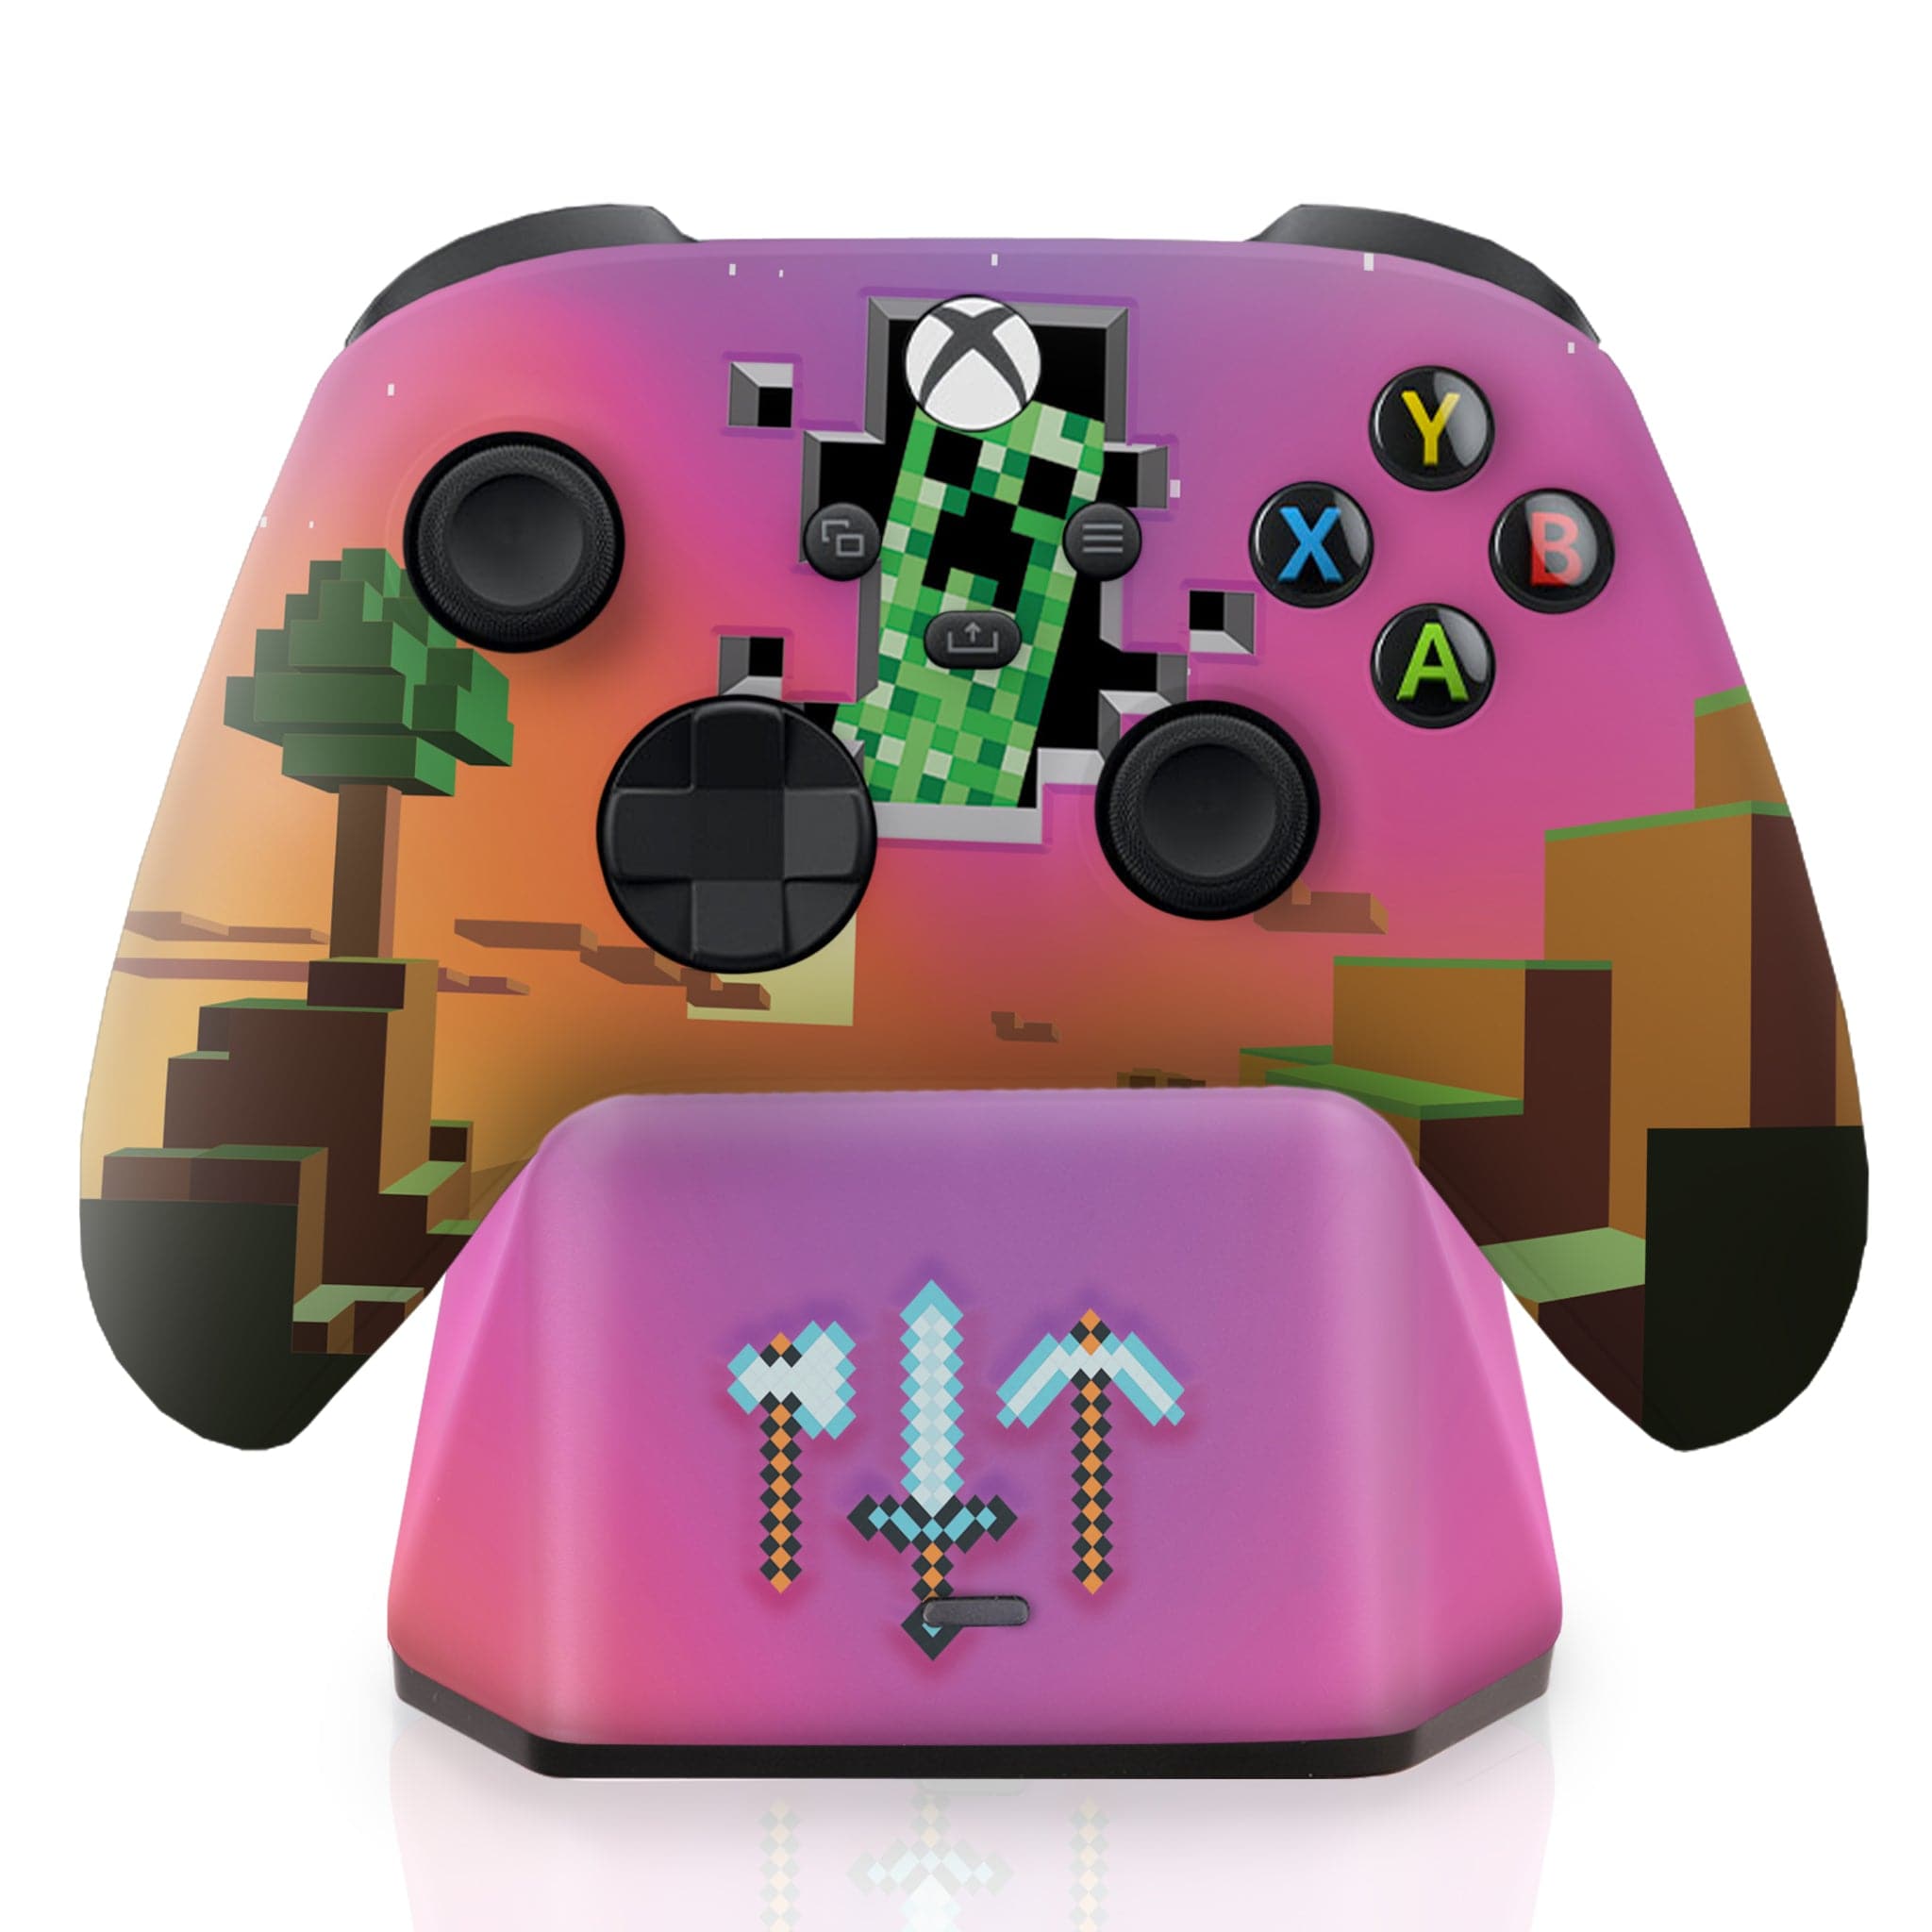 Minecraft World Xbox Series X Controller with Charging Station | New Xbox